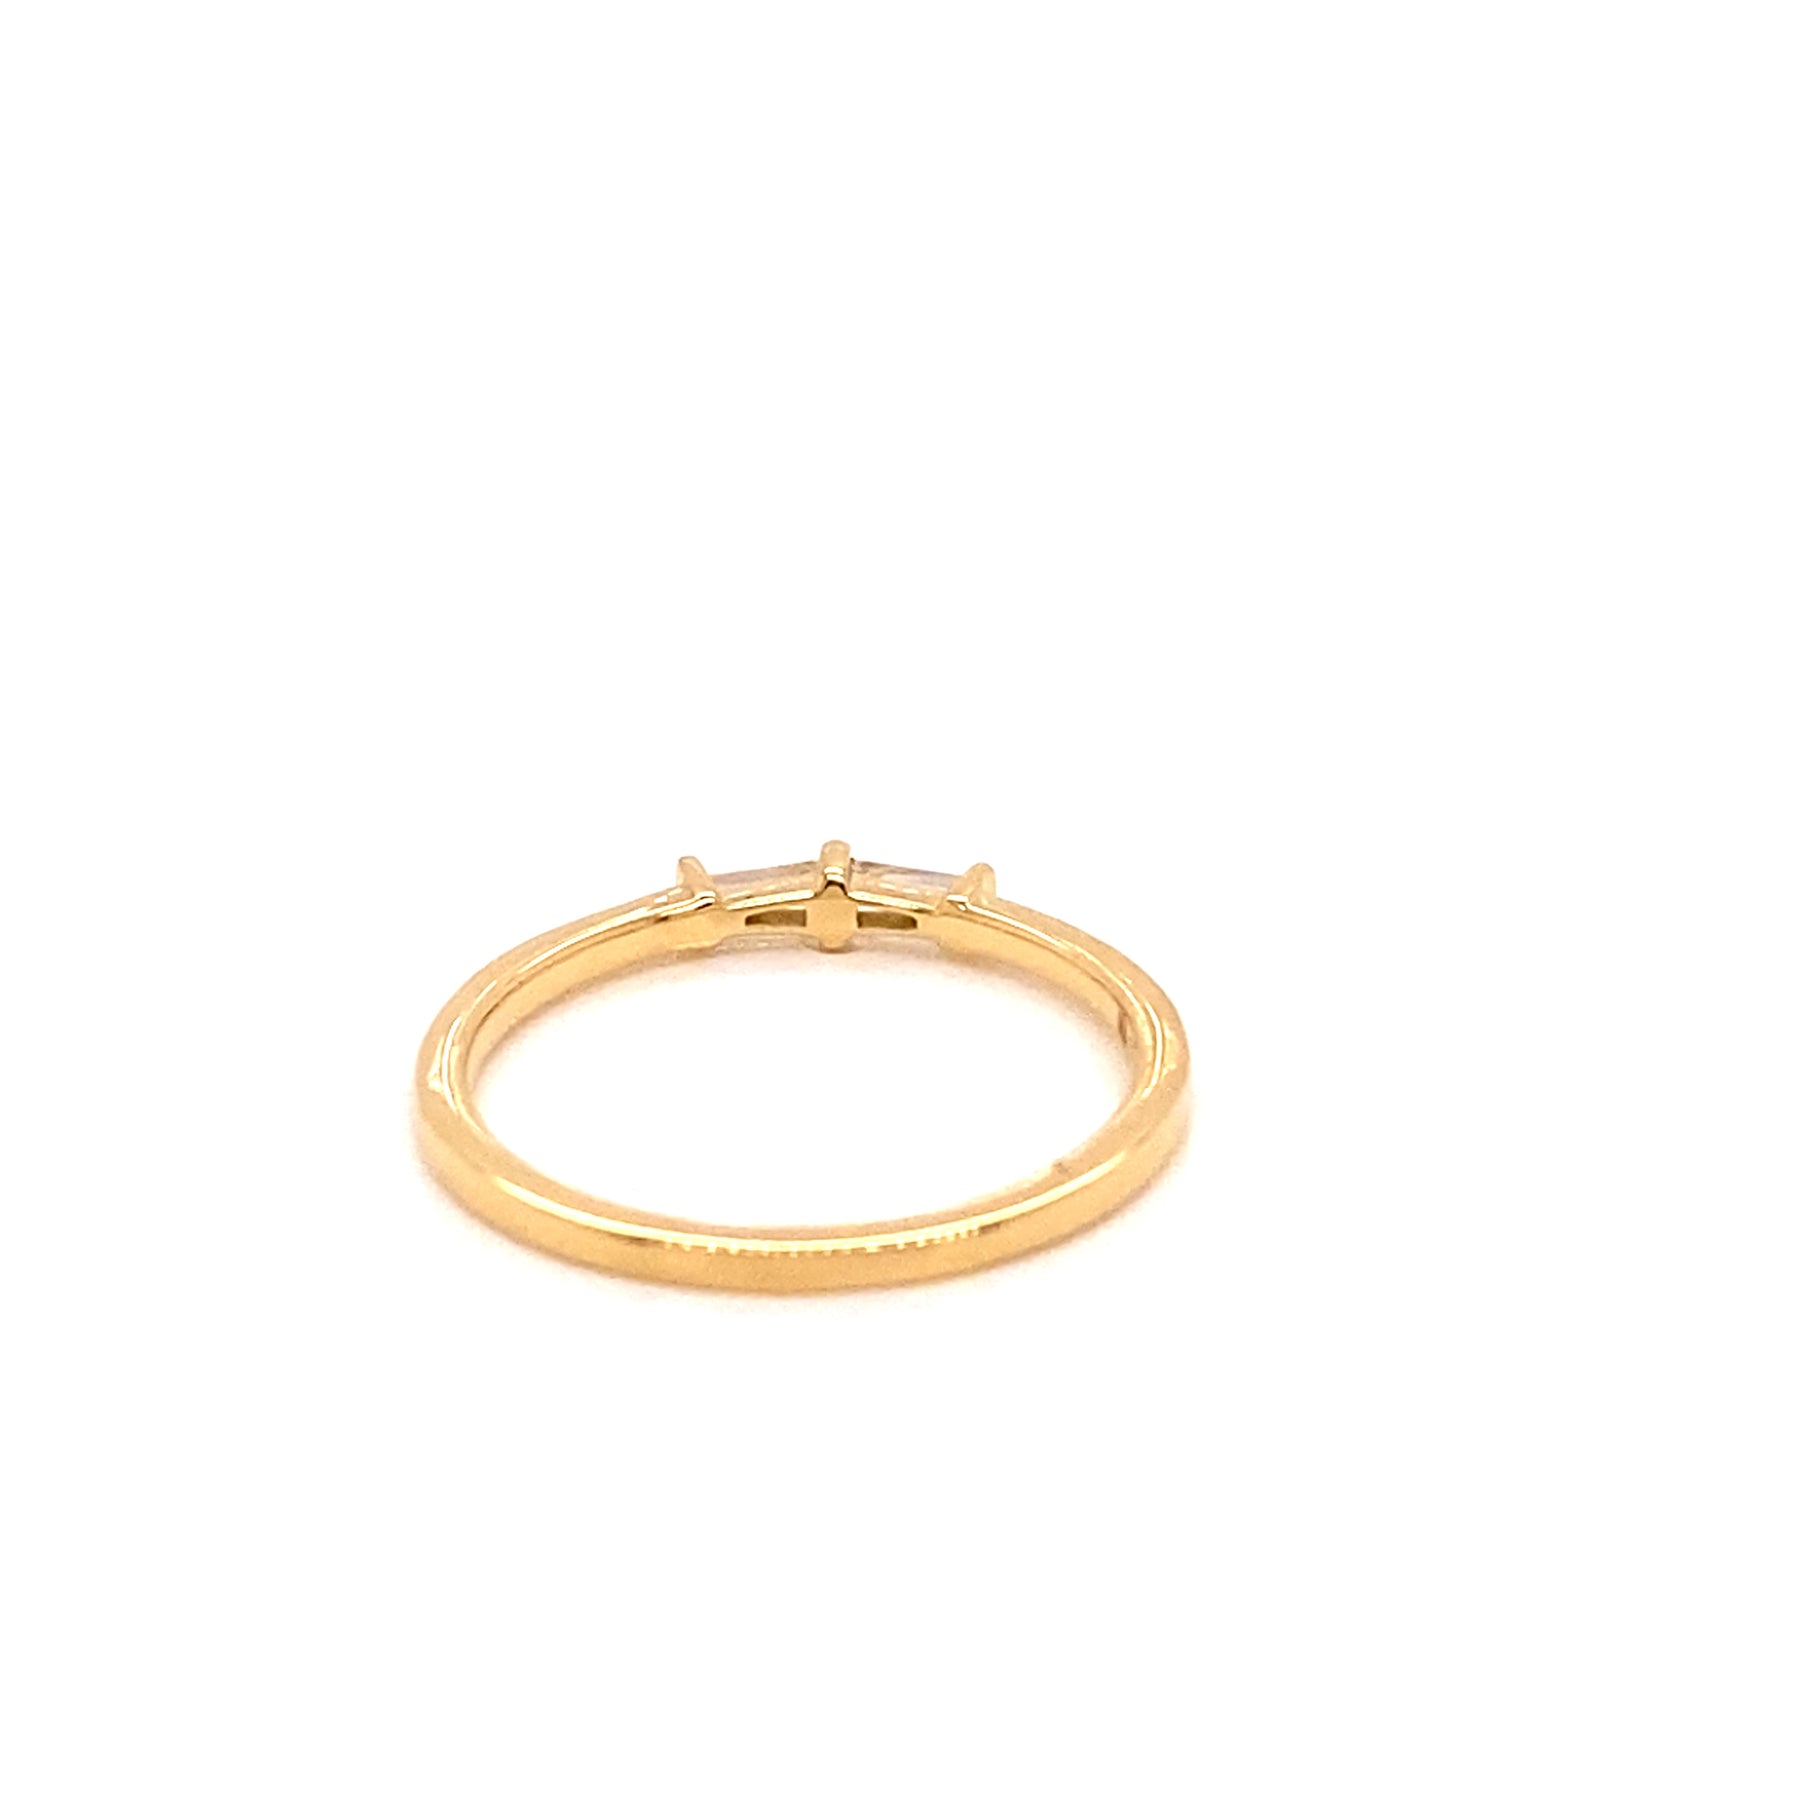 Alternate view of  18k Yellow Gold Skinny Double Baguette Ring